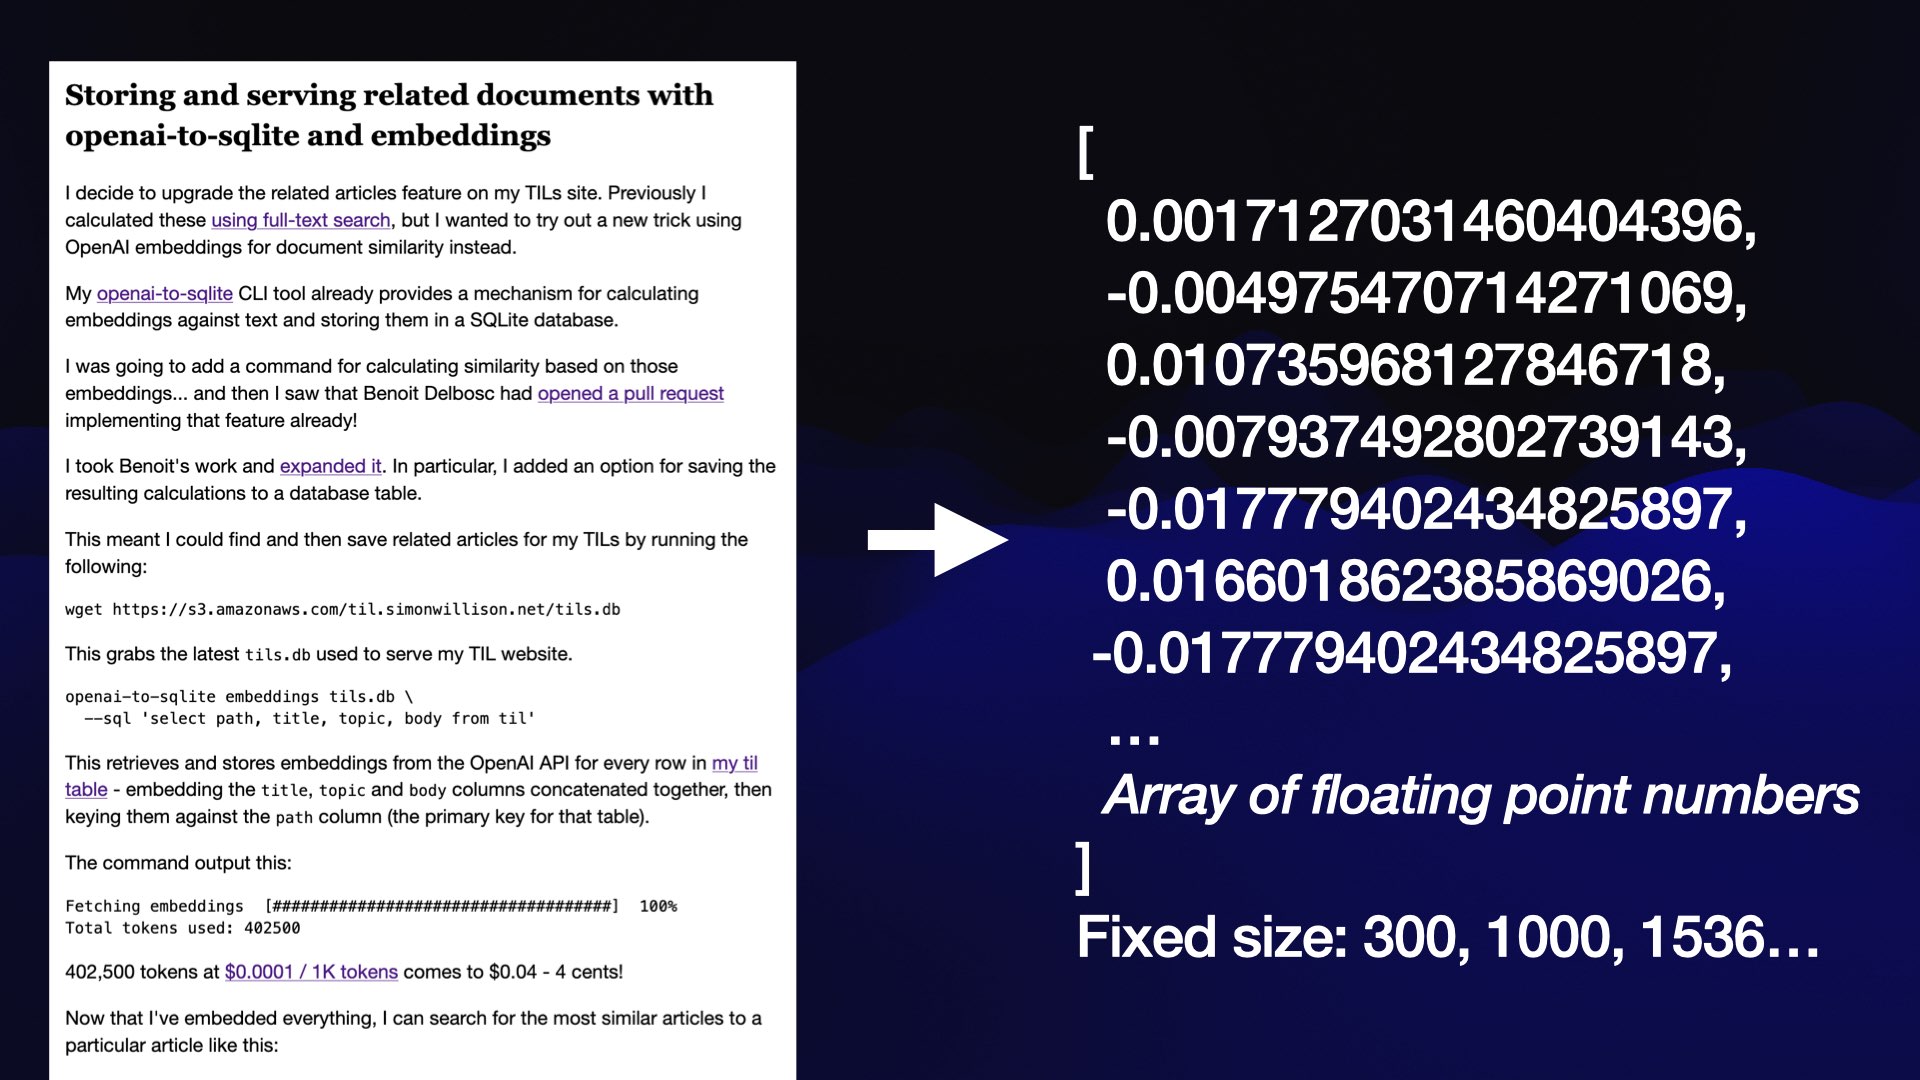 On the left, a blog entry titled Storing and serving related documents with oepnai-to-sqlite and embeddings. On the right, a JSON array of floating point numbers, with the caption Fixed zise: 300, 1000, 1536...